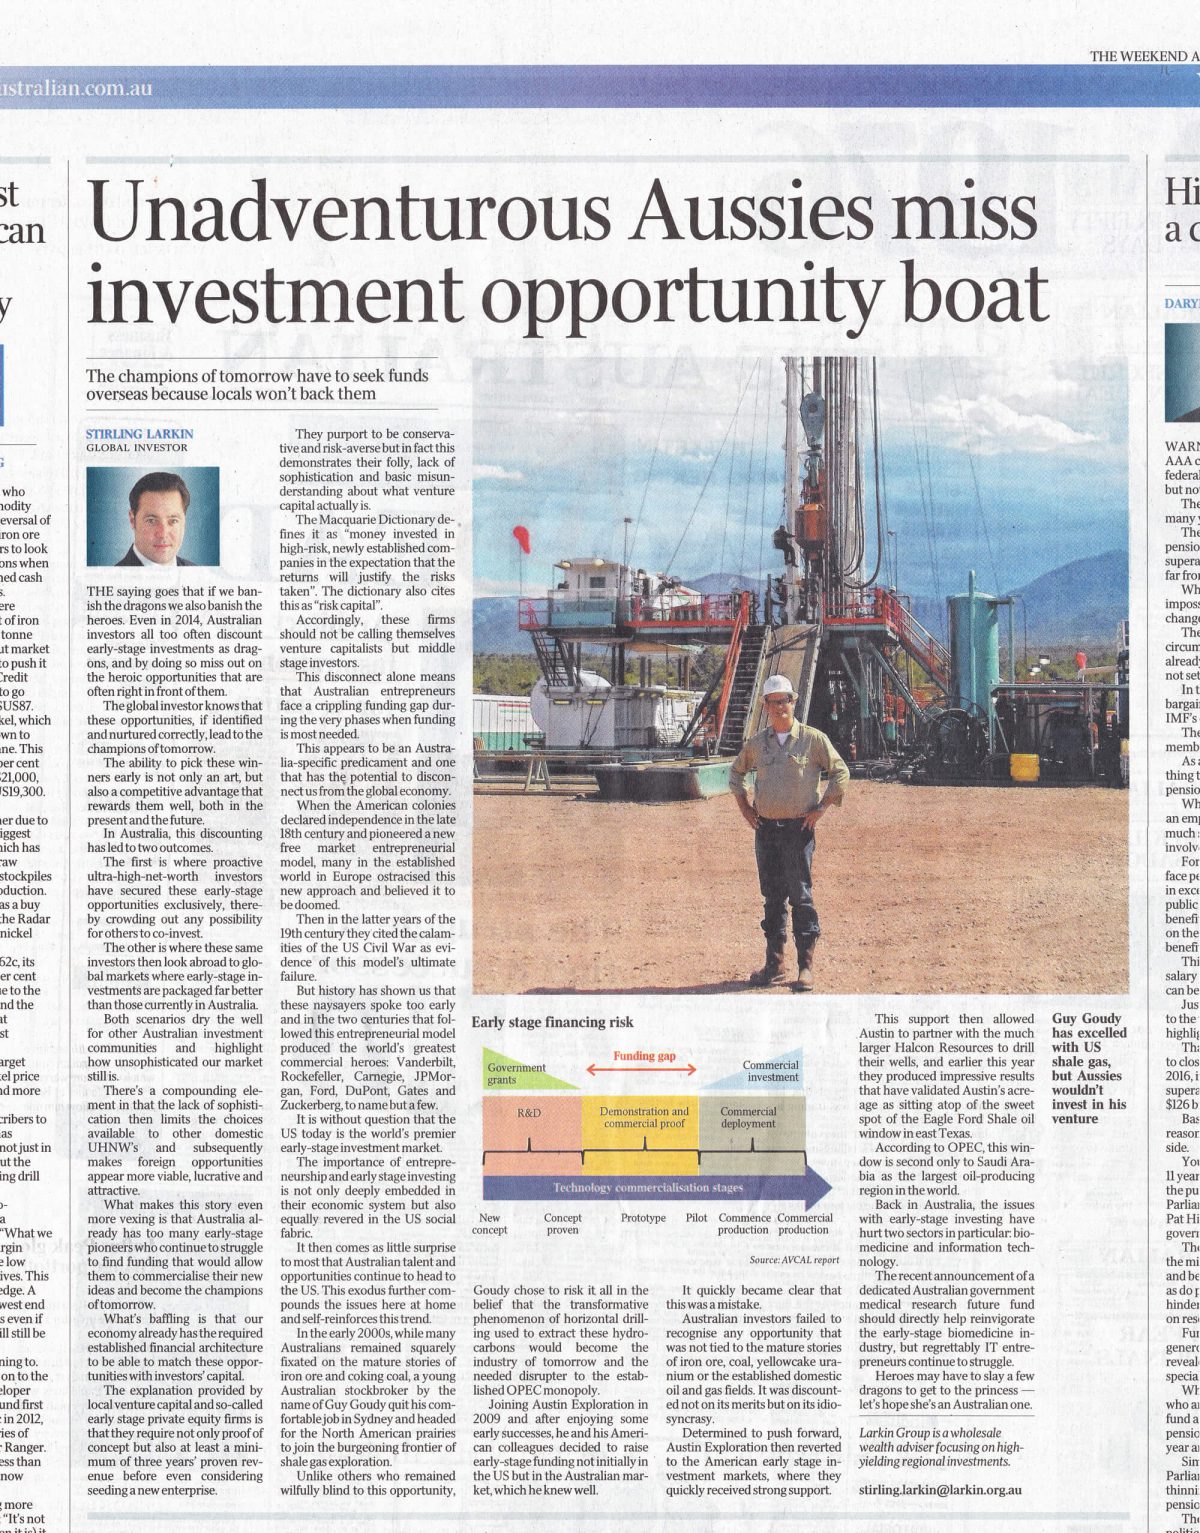 australian standfirst discusses eearly stage investing in 2014 in the australian newspaper